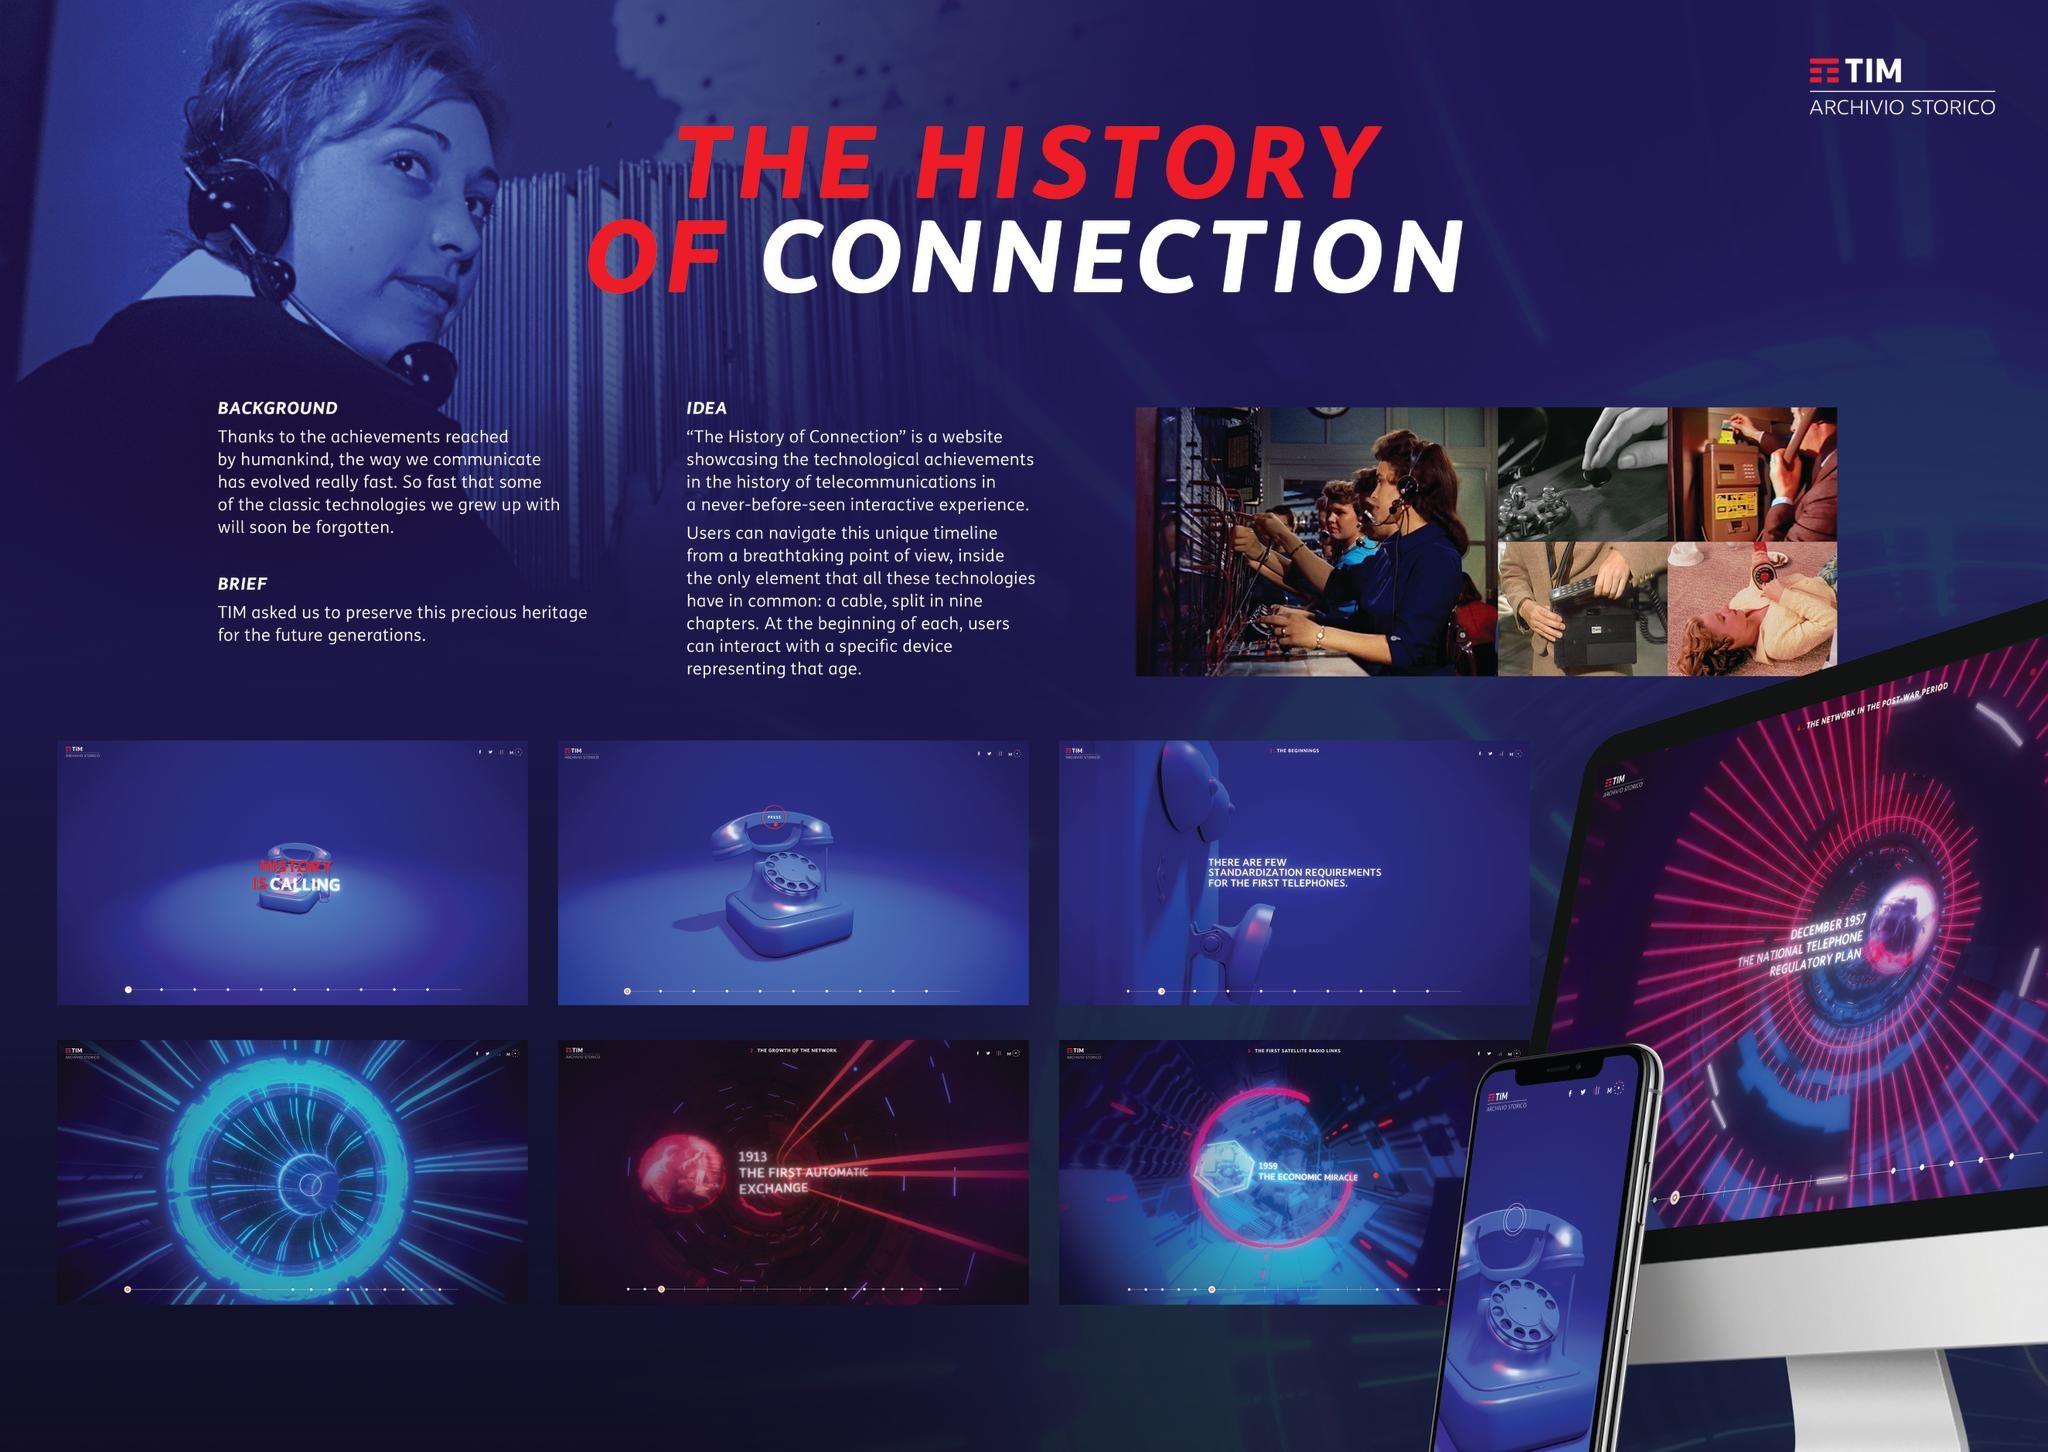 THE HISTORY OF CONNECTION